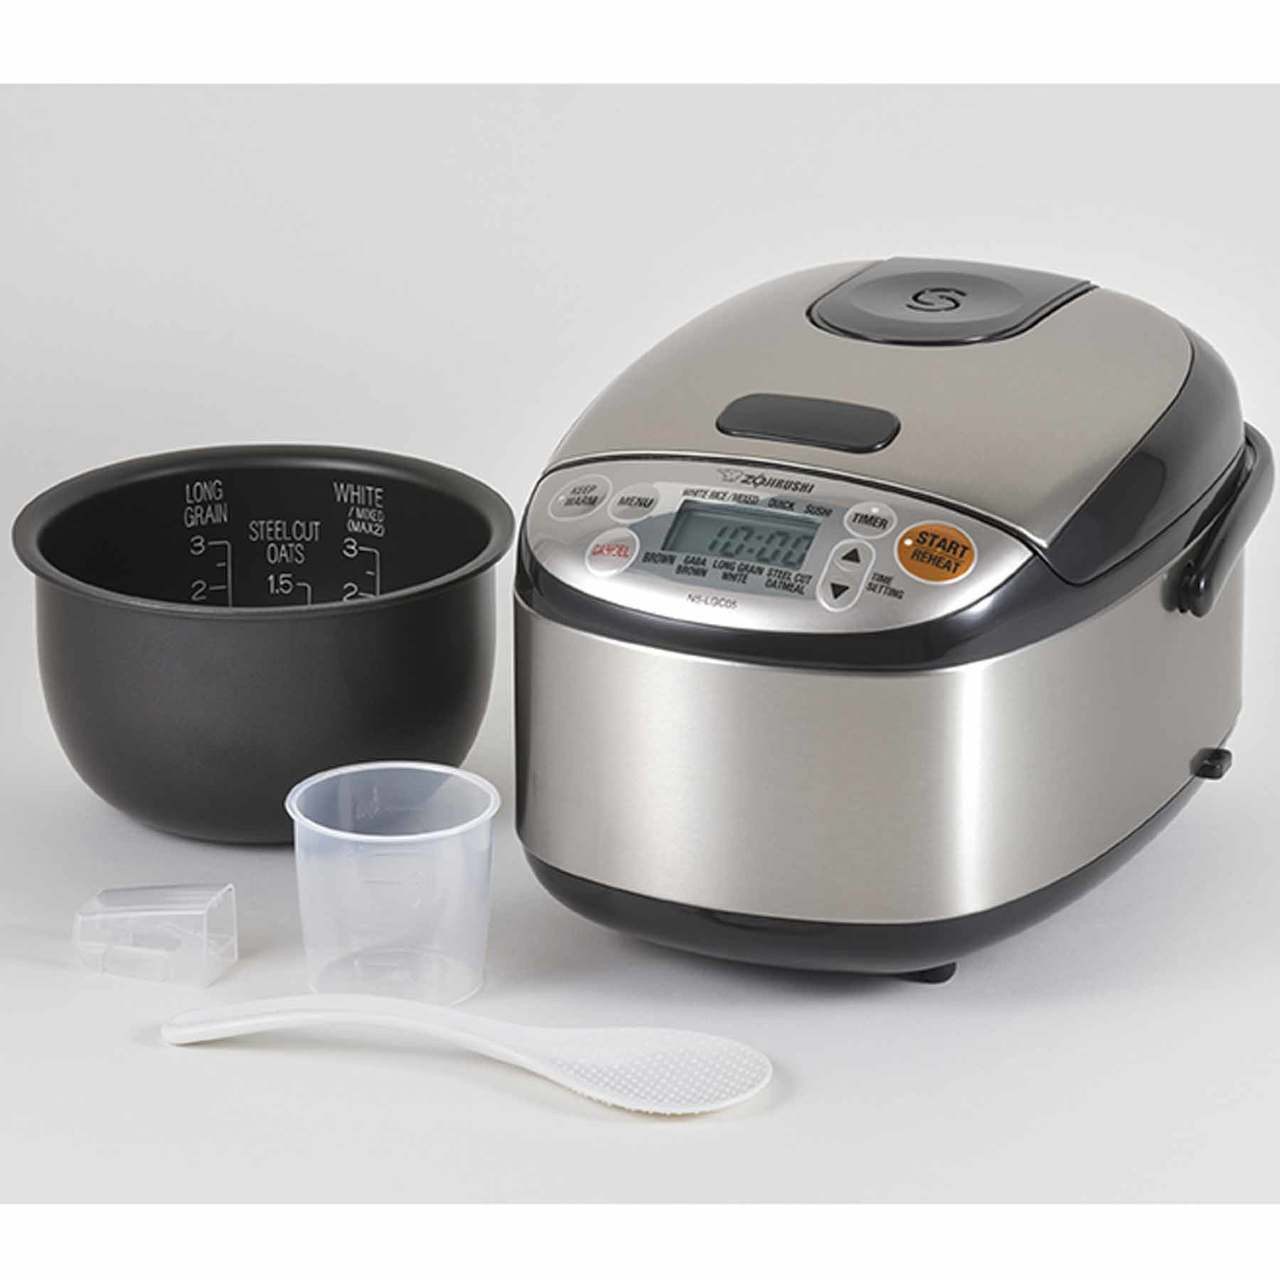 https://cdn11.bigcommerce.com/s-hccytny0od/images/stencil/1280x1280/products/1370/7306/zojirushi-ns-lgc05-micom-rice-cooker-3-cup-3__10413.1586309388.jpg?c=2?imbypass=on